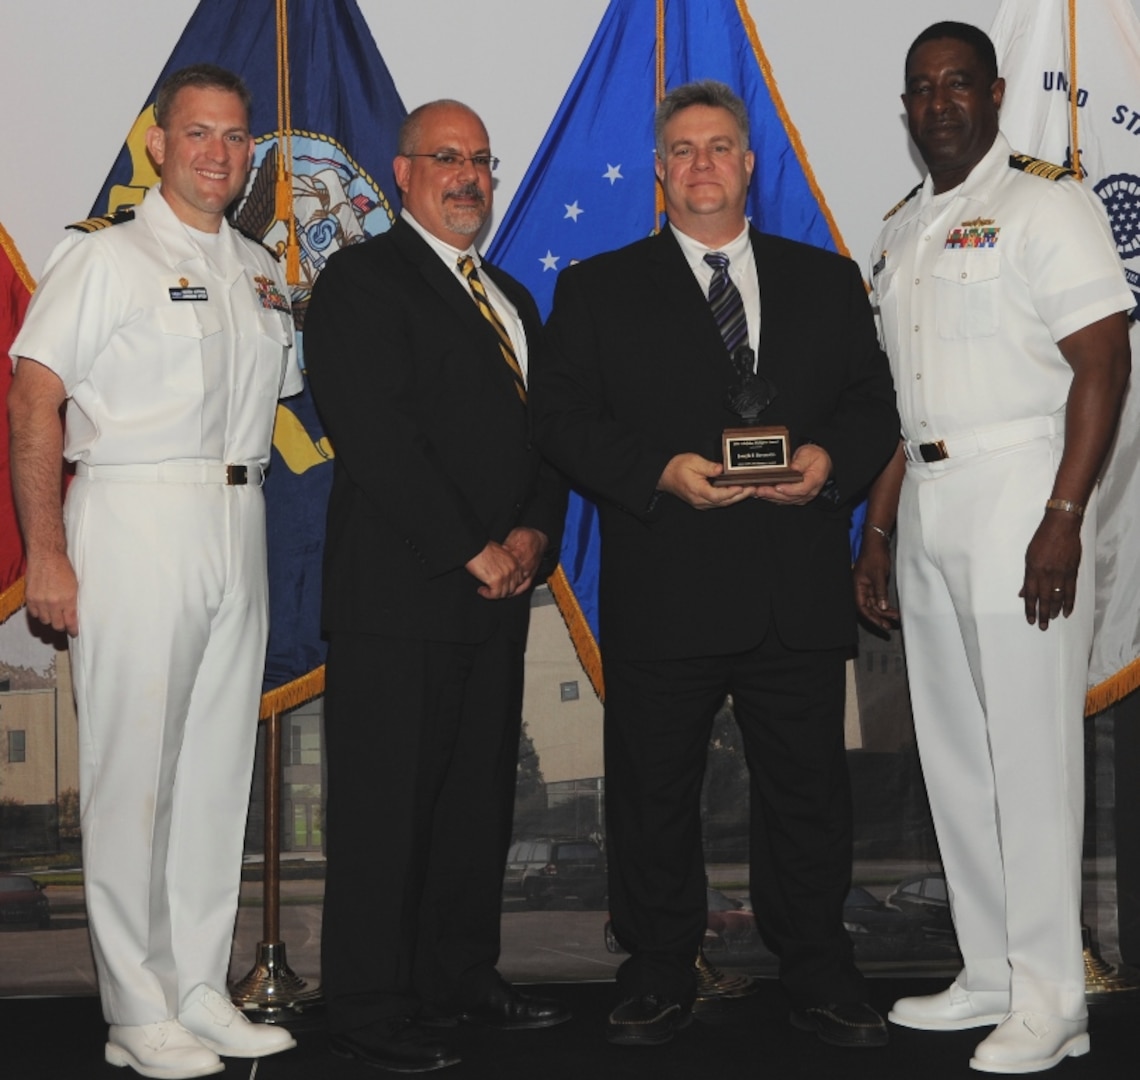 DAHLGREN, Va. (May 17, 2017) - Joseph Berenotto holds  the John Adolphus Dahlgren Award moments after receiving it from Naval Surface Warfare Center Dahlgren Division (NSWCDD) leadership at the command's annual honor awards ceremony. Berenotto was recognized for his outstanding contributions to the Submarine Launched Ballistic Missile program and NSWCDD. "Mr. Berenotto's visionary thinking and demonstrated technical leadership in employment engineering, system simulation, modeling and analysis have greatly benefited Navy strategic systems and NSWCDD's role in this program's unparalleled record of readiness and reliability," according to the citation. Standing left to right: Combat Direction Systems Activity Commanding Officer Cmdr. Andrew Hoffman; NSWCDD Technical Director John Fiore; Berenotto; and NSWCDD Commanding Officer Capt. Godfrey 'Gus' Weekes.